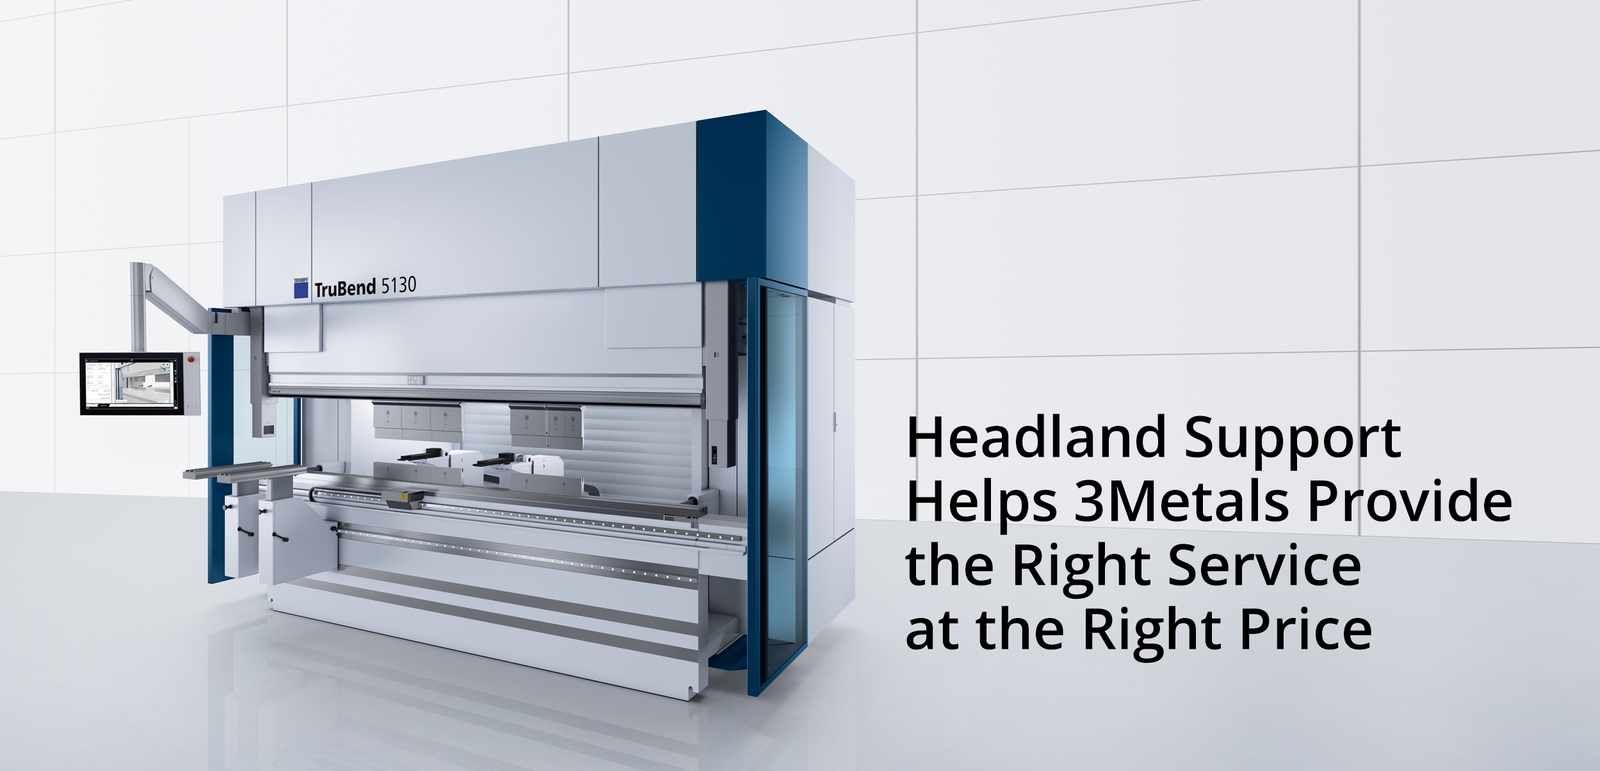 Headland Support Helps 3Metals Provide the Right Service at the Right Price